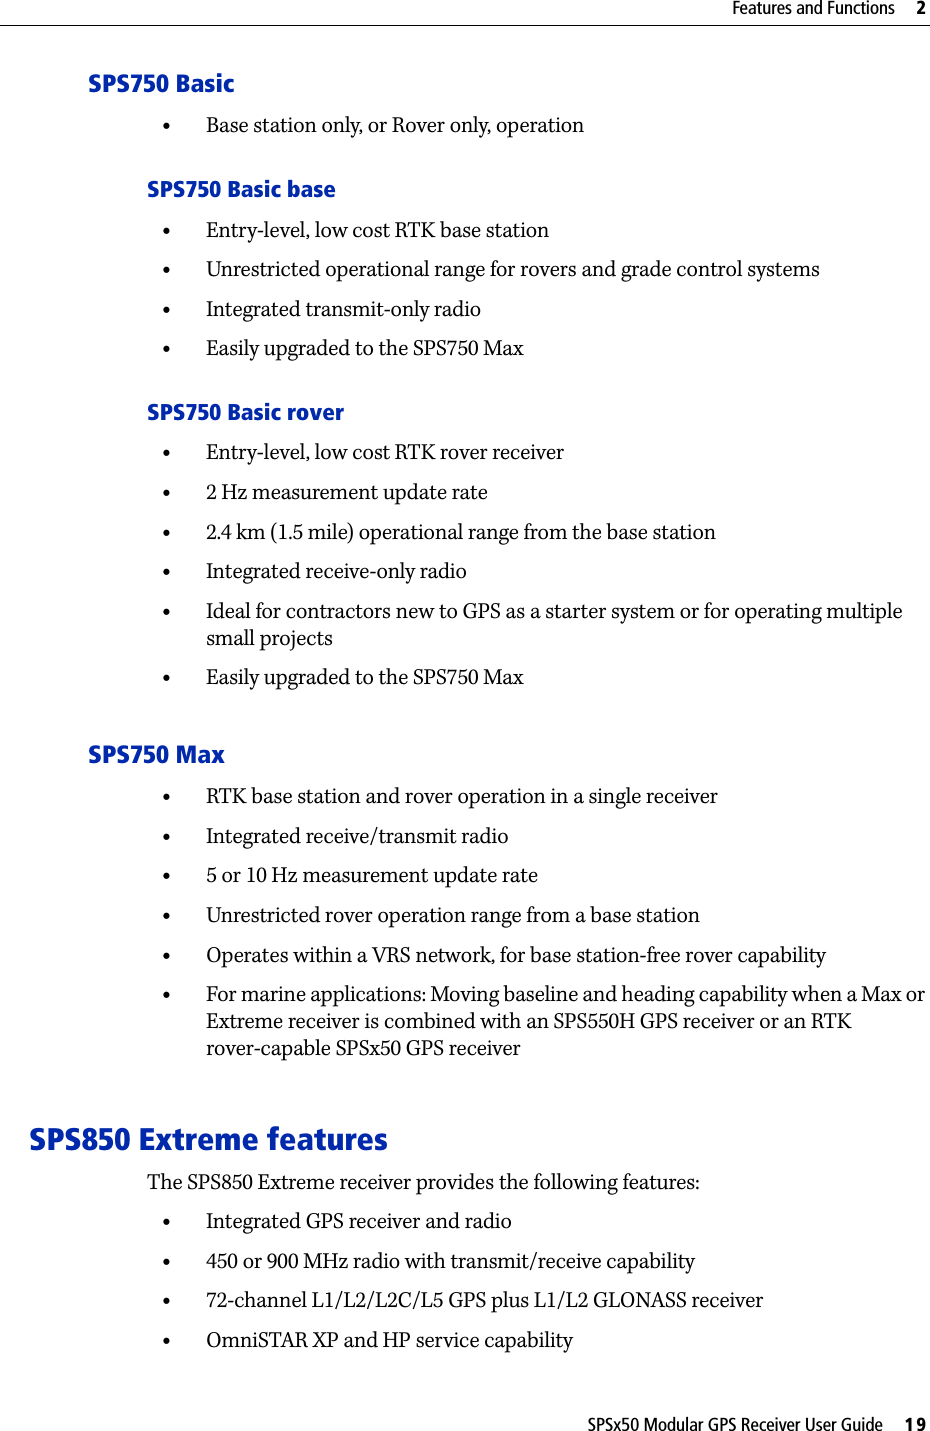 SPSx50 Modular GPS Receiver User Guide     19Features and Functions     2SPS750 Basic•Base station only, or Rover only, operationSPS750 Basic base•Entry-level, low cost RTK base station•Unrestricted operational range for rovers and grade control systems•Integrated transmit-only radio•Easily upgraded to the SPS750 MaxSPS750 Basic rover•Entry-level, low cost RTK rover receiver•2 Hz measurement update rate•2.4 km (1.5 mile) operational range from the base station•Integrated receive-only radio•Ideal for contractors new to GPS as a starter system or for operating multiple small projects •Easily upgraded to the SPS750 MaxSPS750 Max•RTK base station and rover operation in a single receiver•Integrated receive/transmit radio•5 or 10 Hz measurement update rate•Unrestricted rover operation range from a base station•Operates within a VRS network, for base station-free rover capability•For marine applications: Moving baseline and heading capability when a Max or Extreme receiver is combined with an SPS550H GPS receiver or an RTK rover-capable SPSx50 GPS receiverSPS850 Extreme featuresThe SPS850 Extreme receiver provides the following features:•Integrated GPS receiver and radio•450 or 900 MHz radio with transmit/receive capability•72-channel L1/L2/L2C/L5 GPS plus L1/L2 GLONASS receiver•OmniSTAR XP and HP service capability